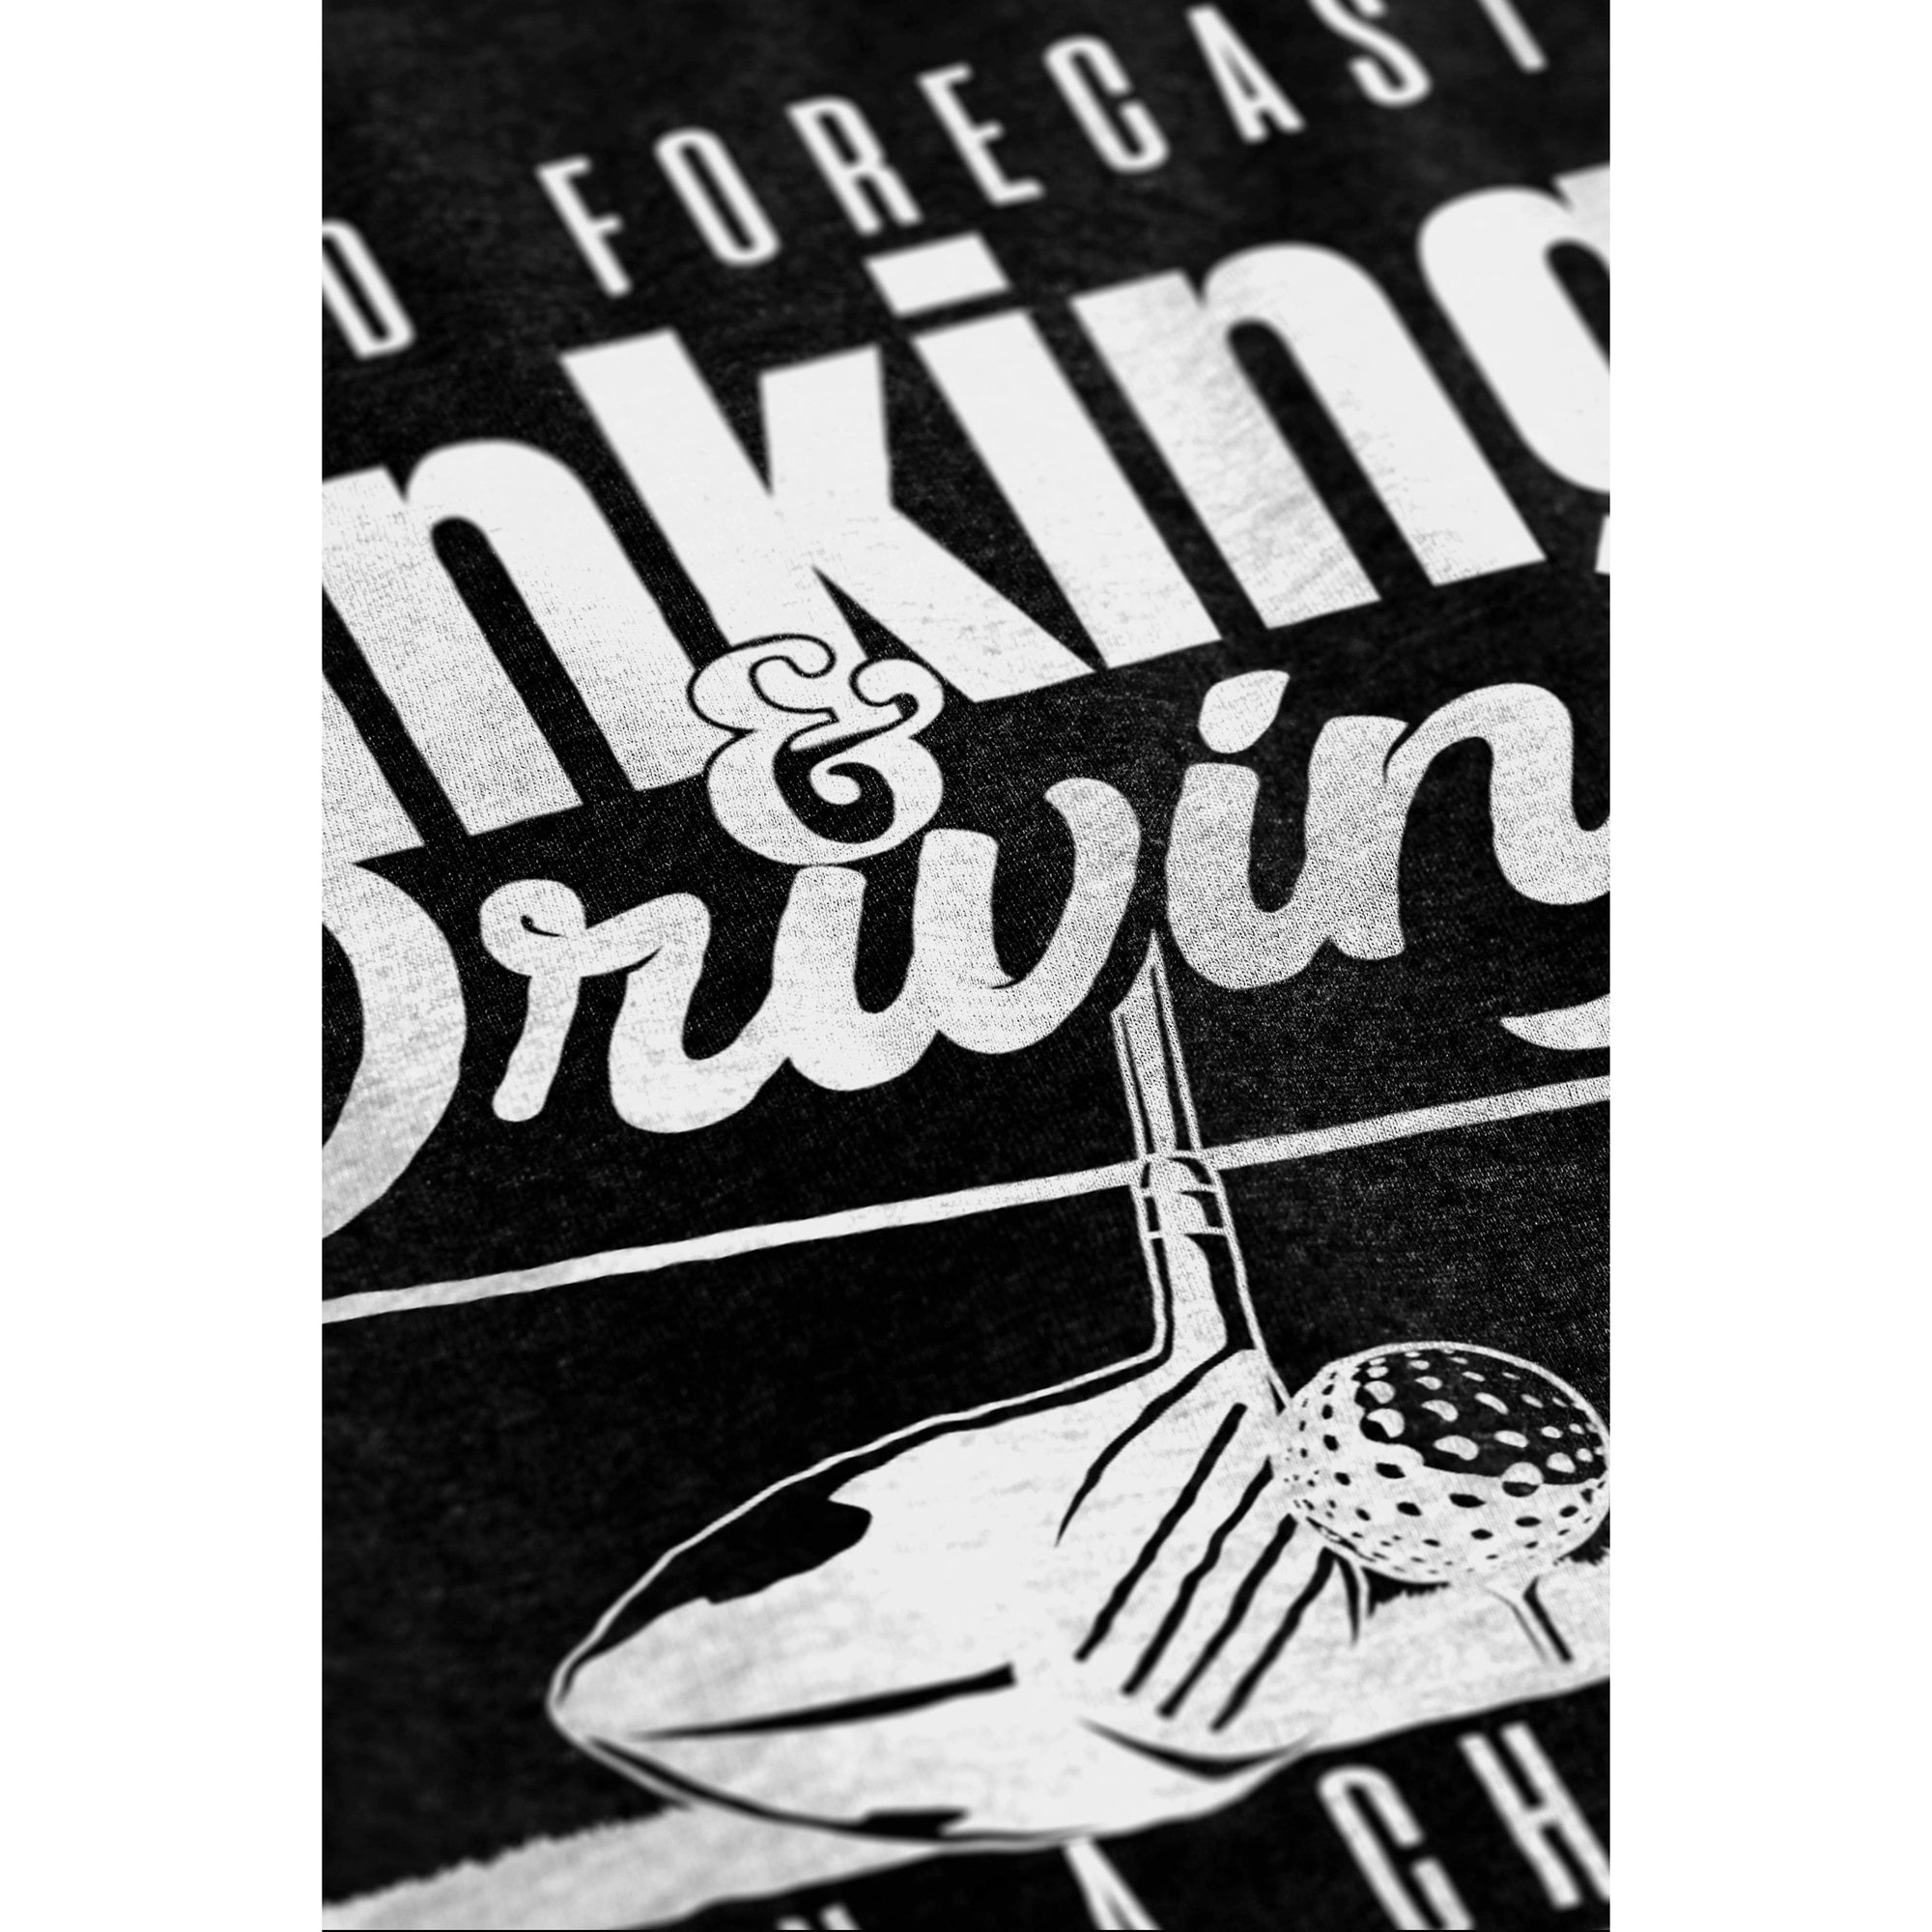 Weekend Forecast Drinking & Driving With A Chance Of Diving - threadtank | stories you can wear